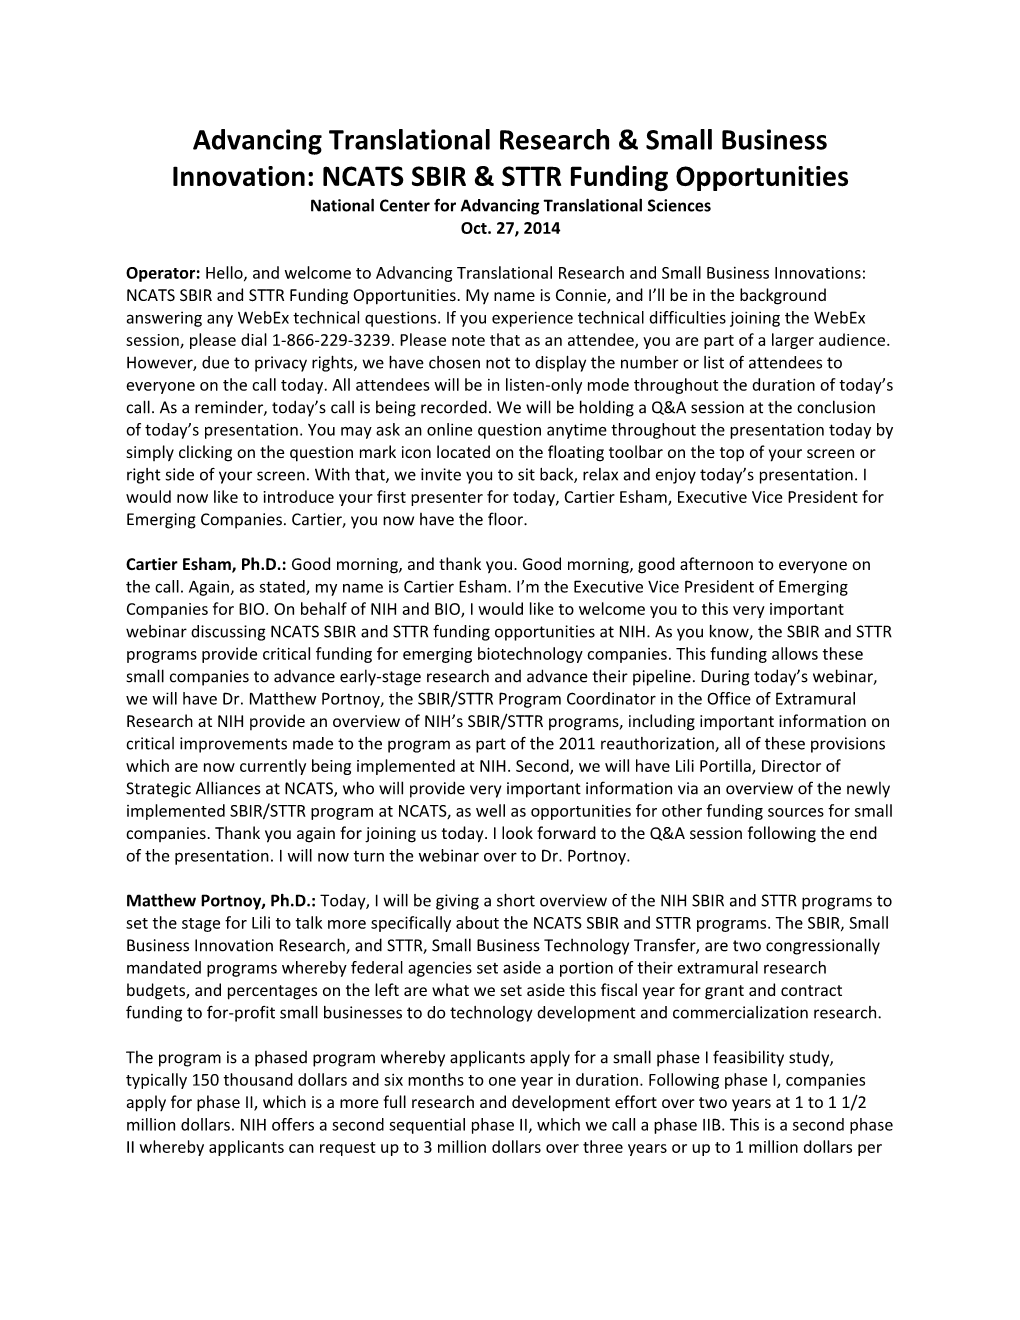 Advancing Translational Research Small Business Innovation: NCATS SBIR STTR Funding